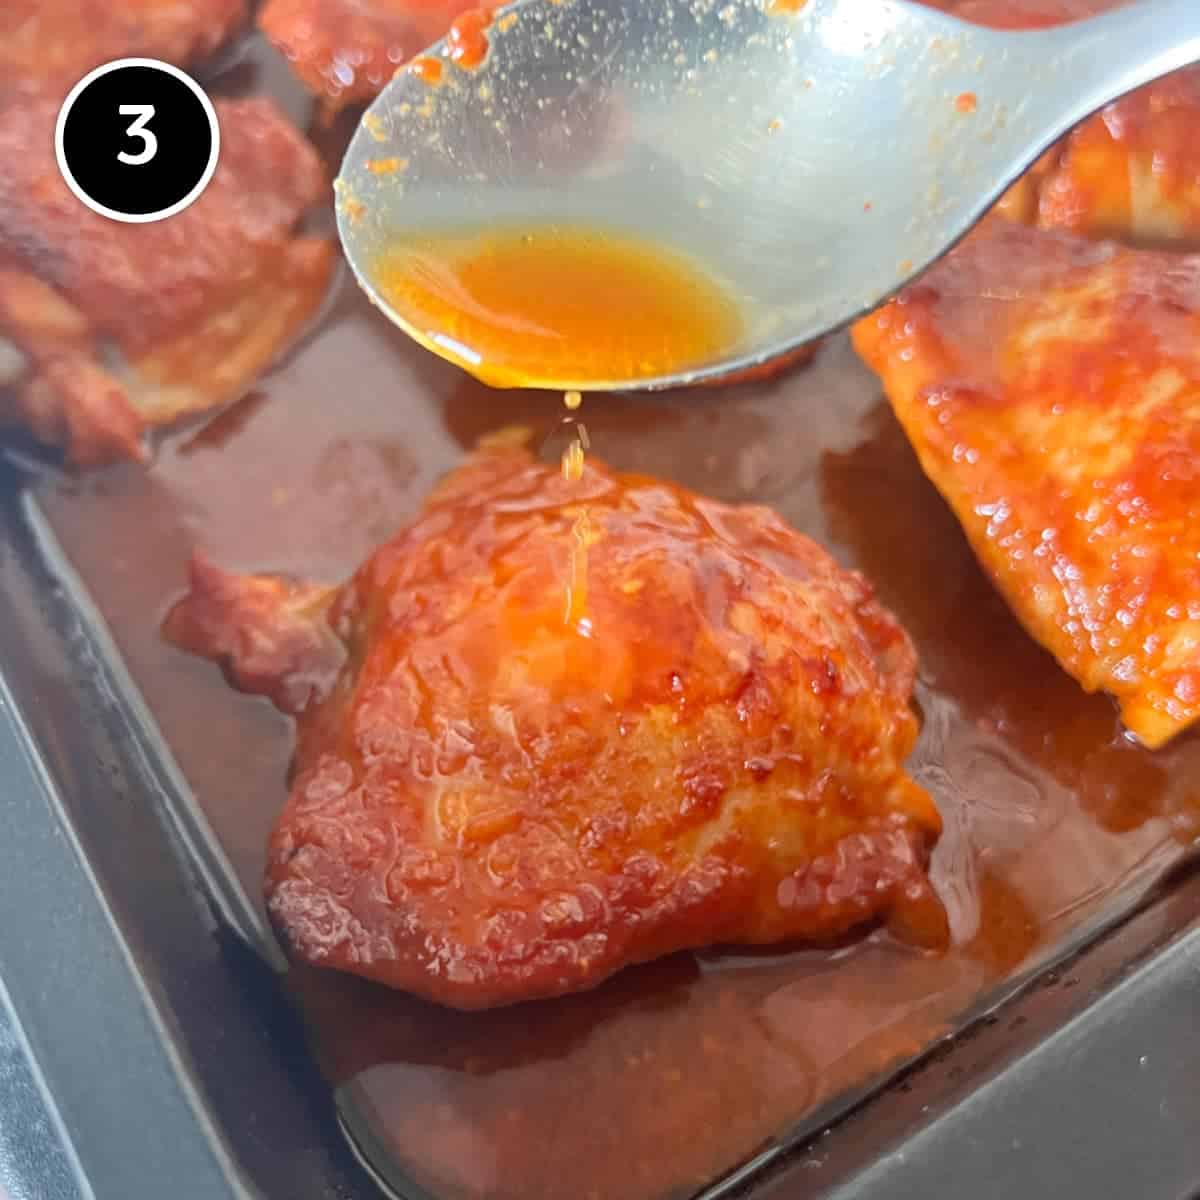 Basting the Gochujang chicken with the pan juices